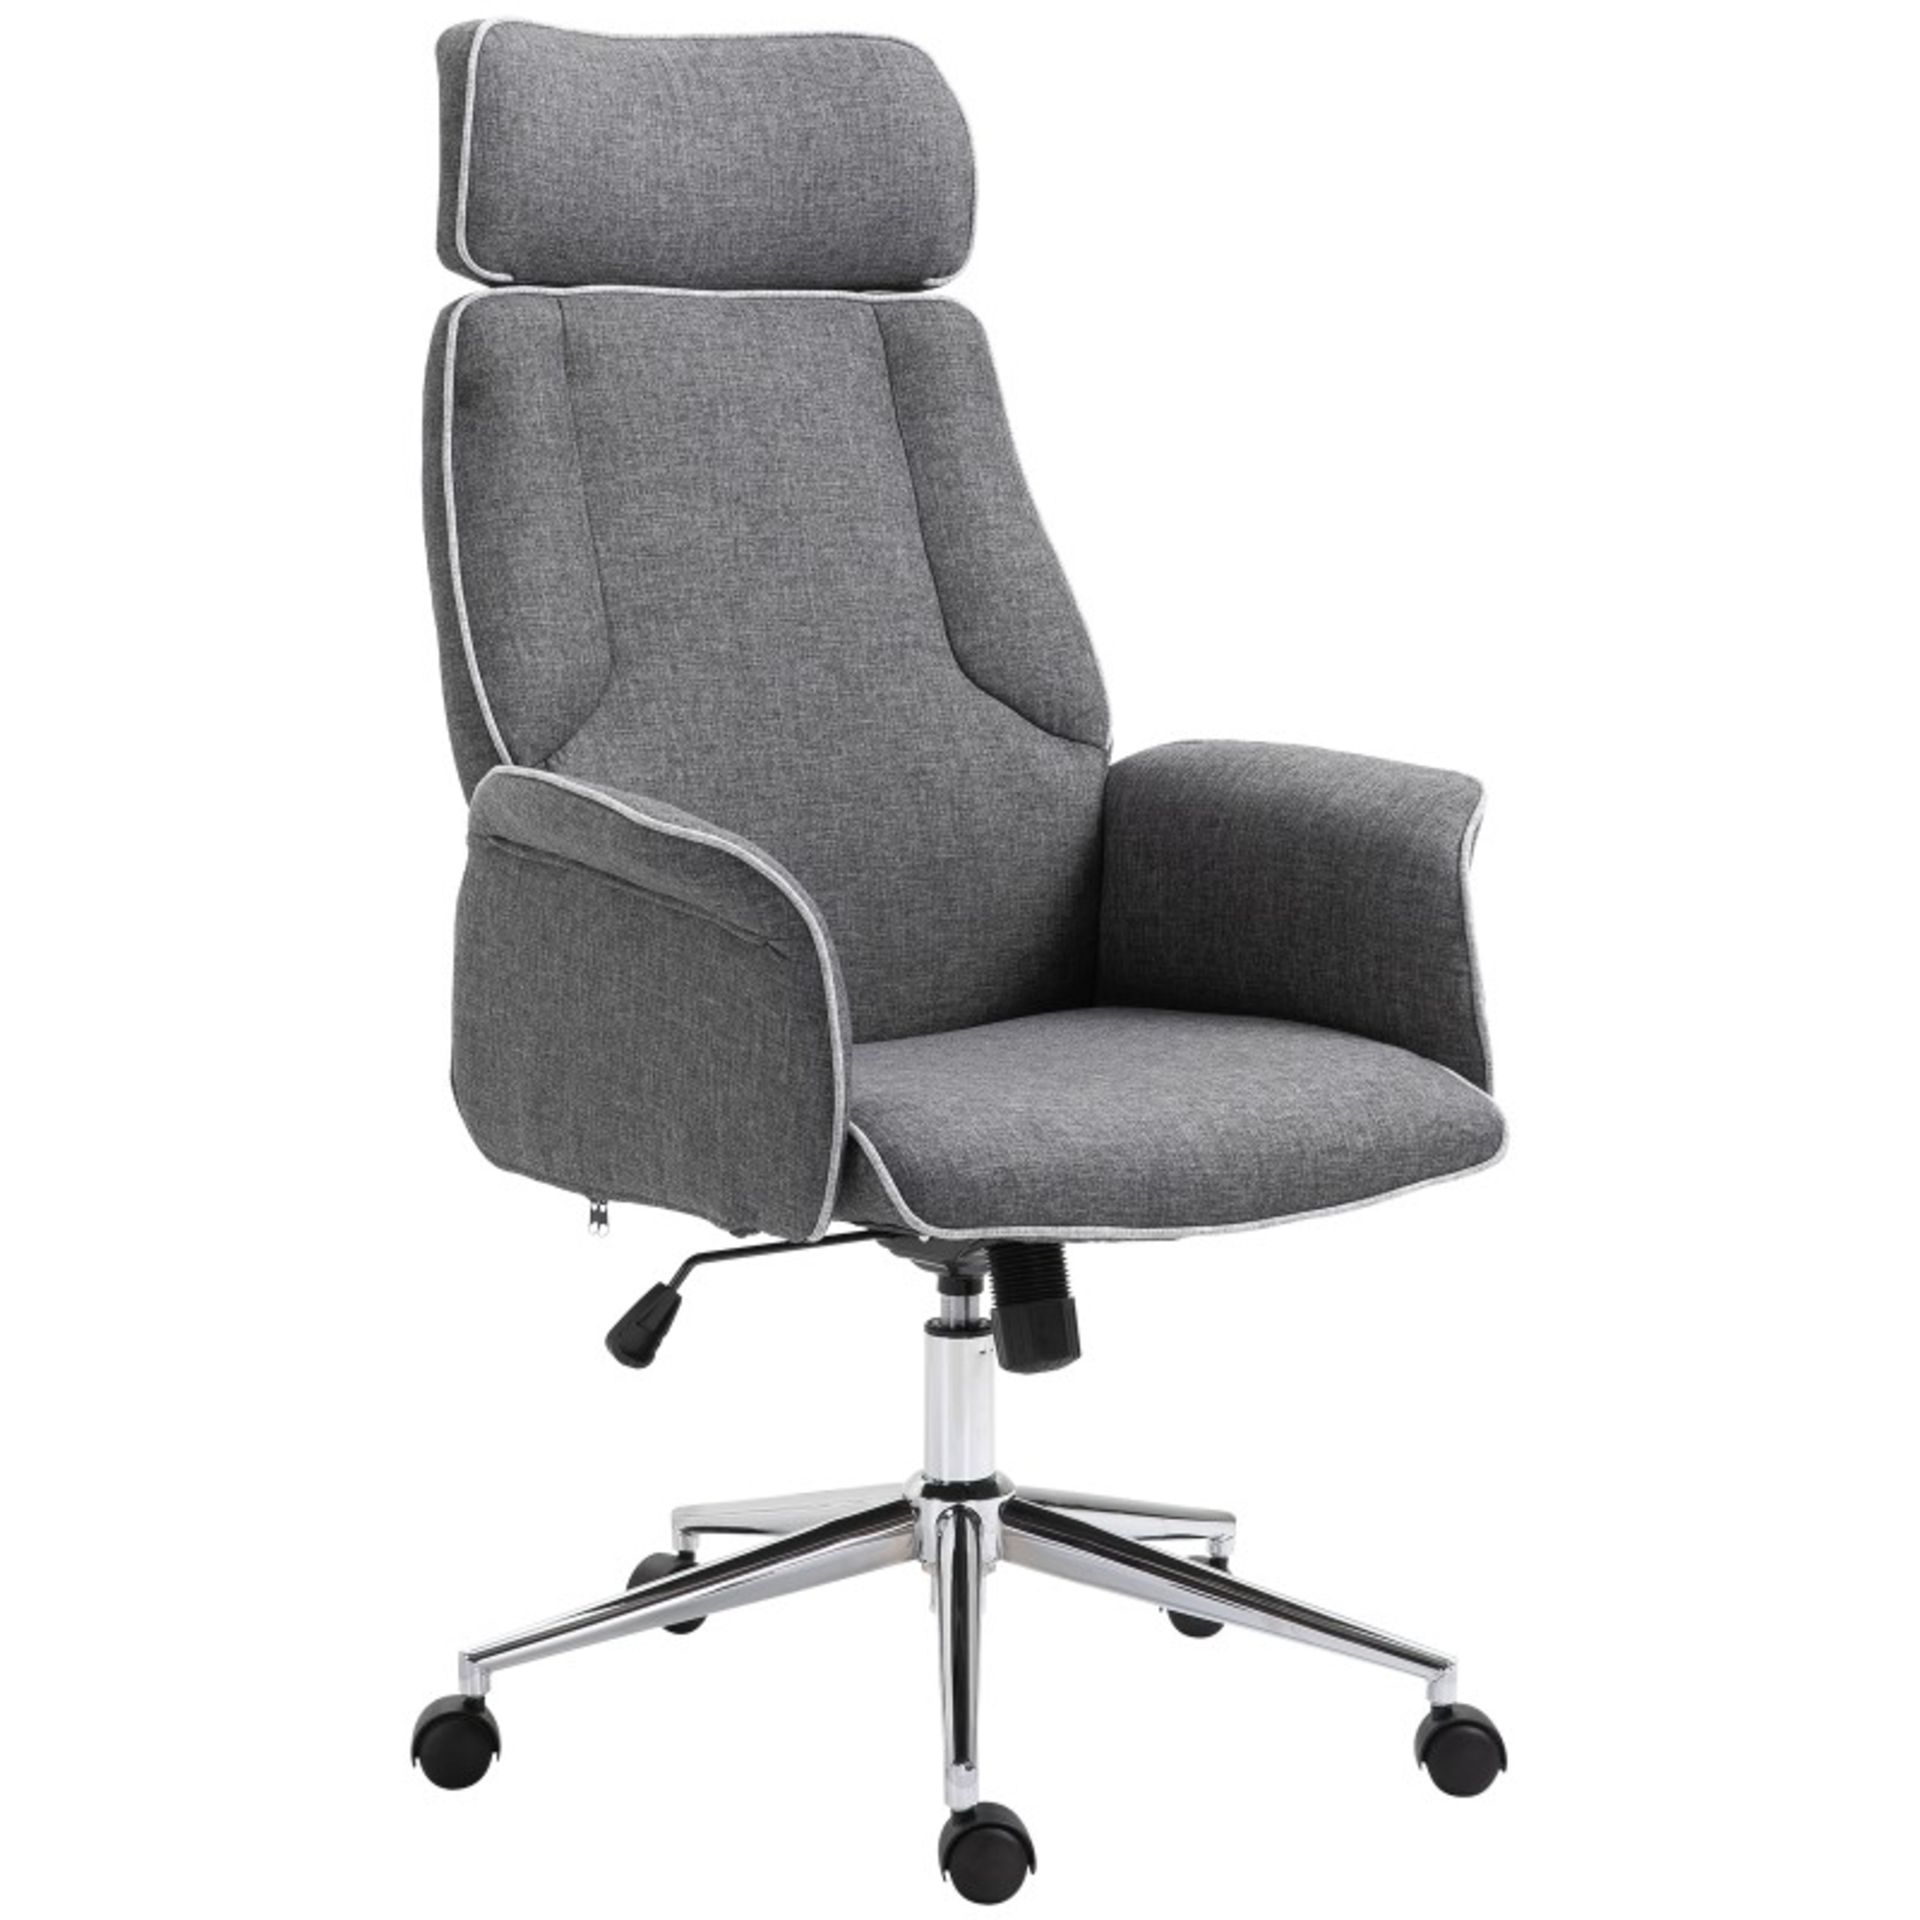 RRP £109.99 - Vinsetto Desk Rocking Chair for Office Executive Adjustable High Back on Wheels Grey